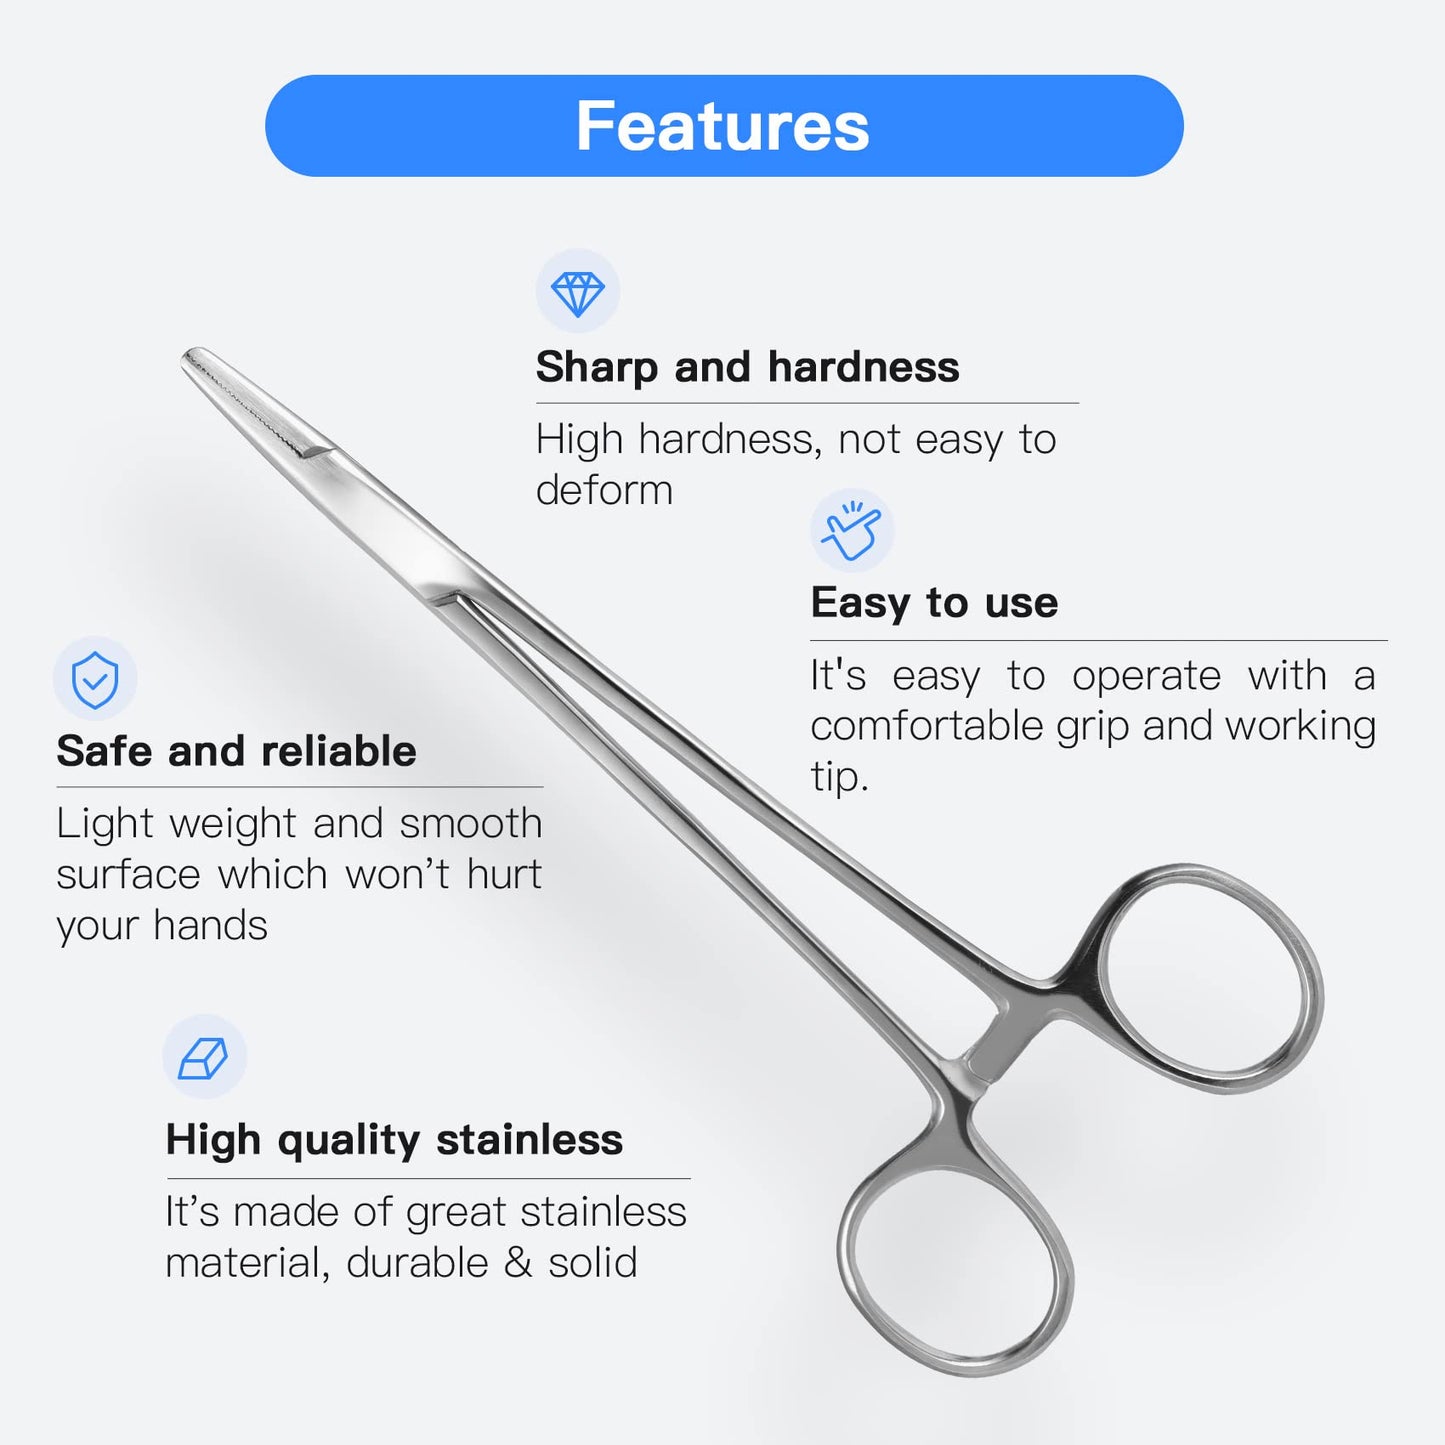 Needle Holder Driver 6.3" Needle Driver Clamps with Tungsten Carbide Cross Serrated Inserts, Protector Dental Suture Practice Needle Driver